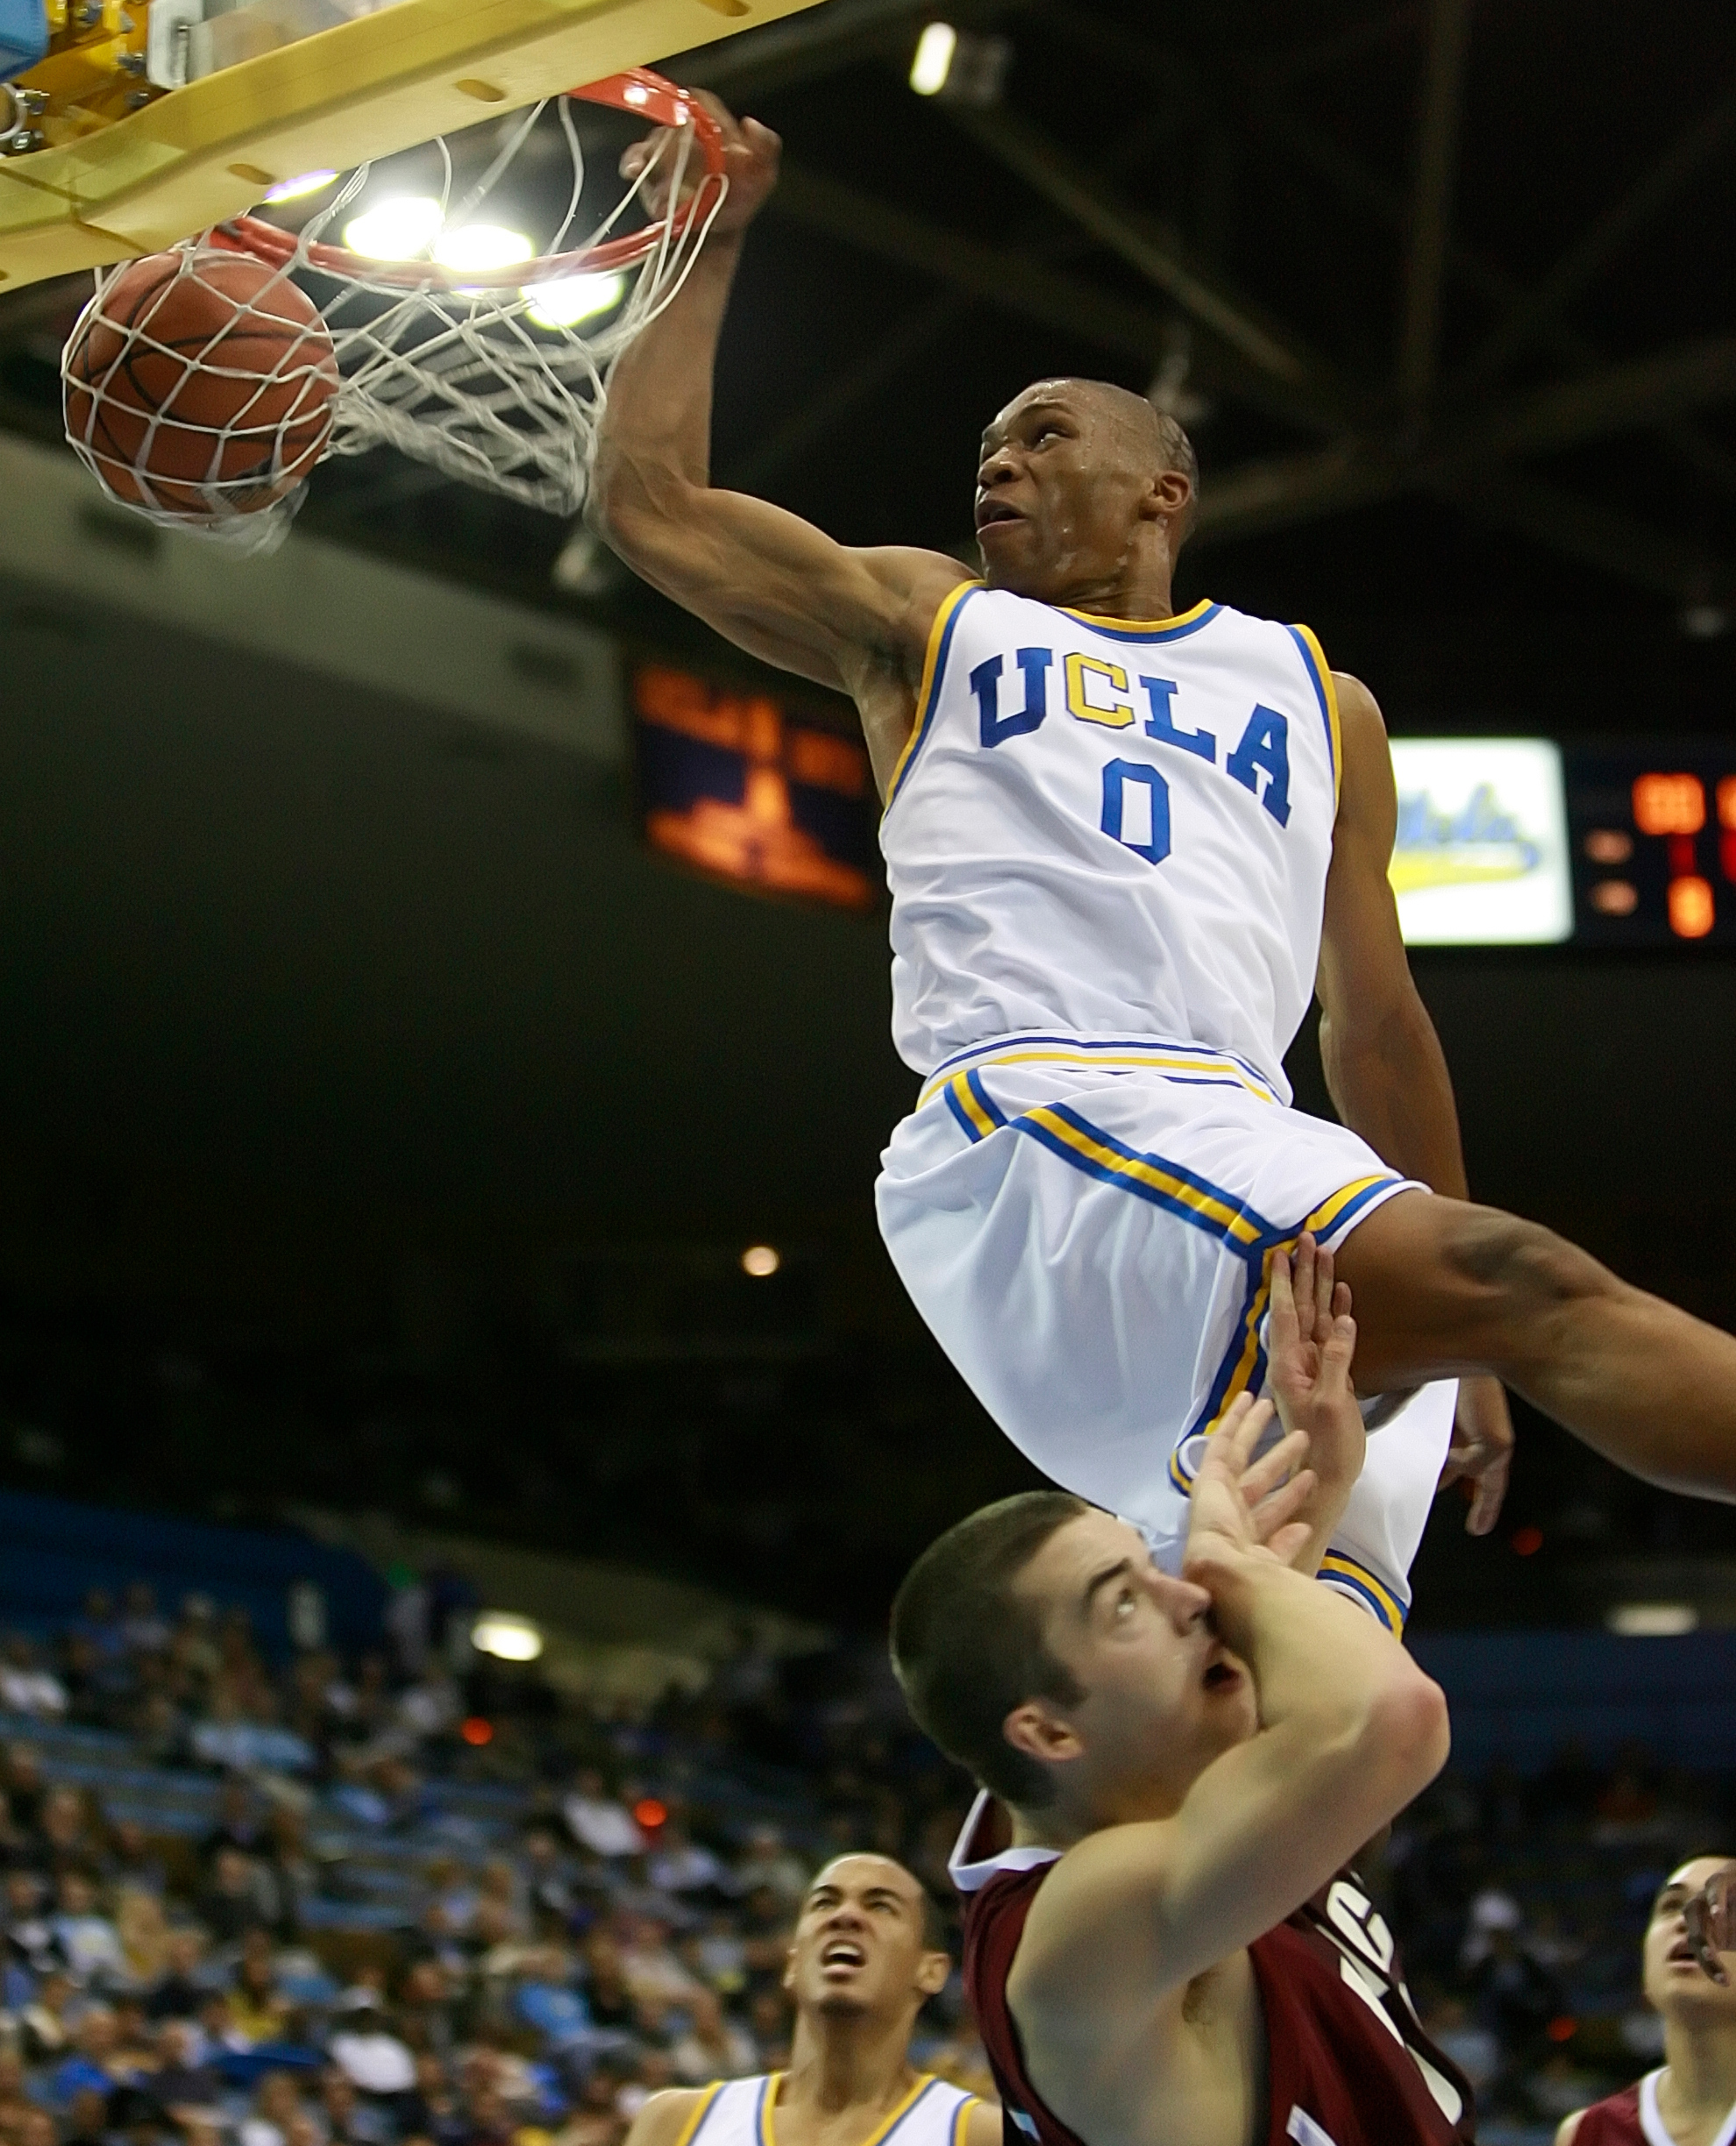 Russell Westbrook, who played two seasons for UCLA before entering the 2008 NBA draft, has made the largest donation ever by a former Bruin basketball player. (John Lazar/Staff)